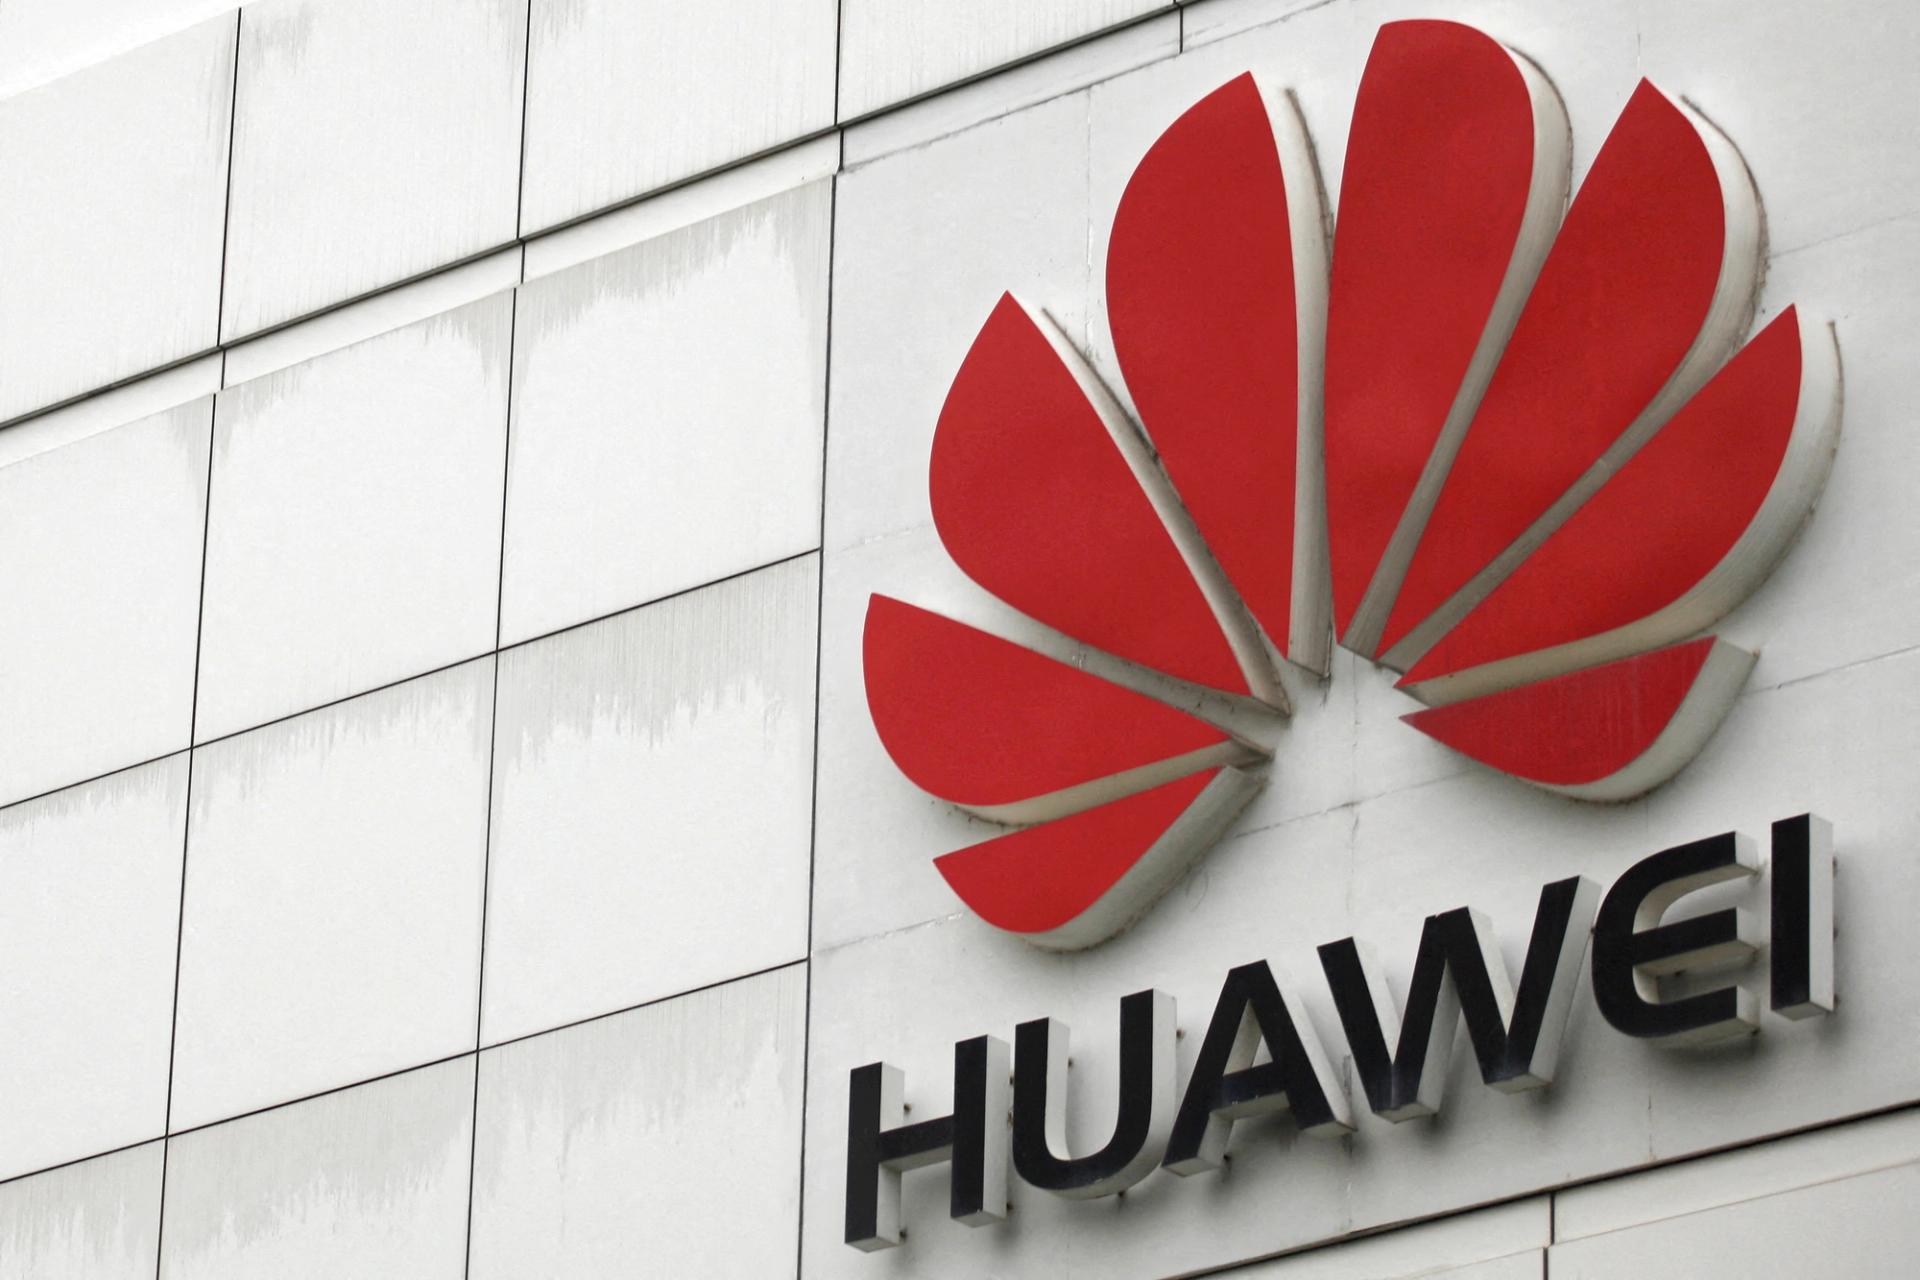 The logo of the Huawei Technologies Co. Ltd. is seen outside its headquarters in Shenzhen, Guangdong province, April 17, 2012. REUTERS/Tyrone Siu/File Photo